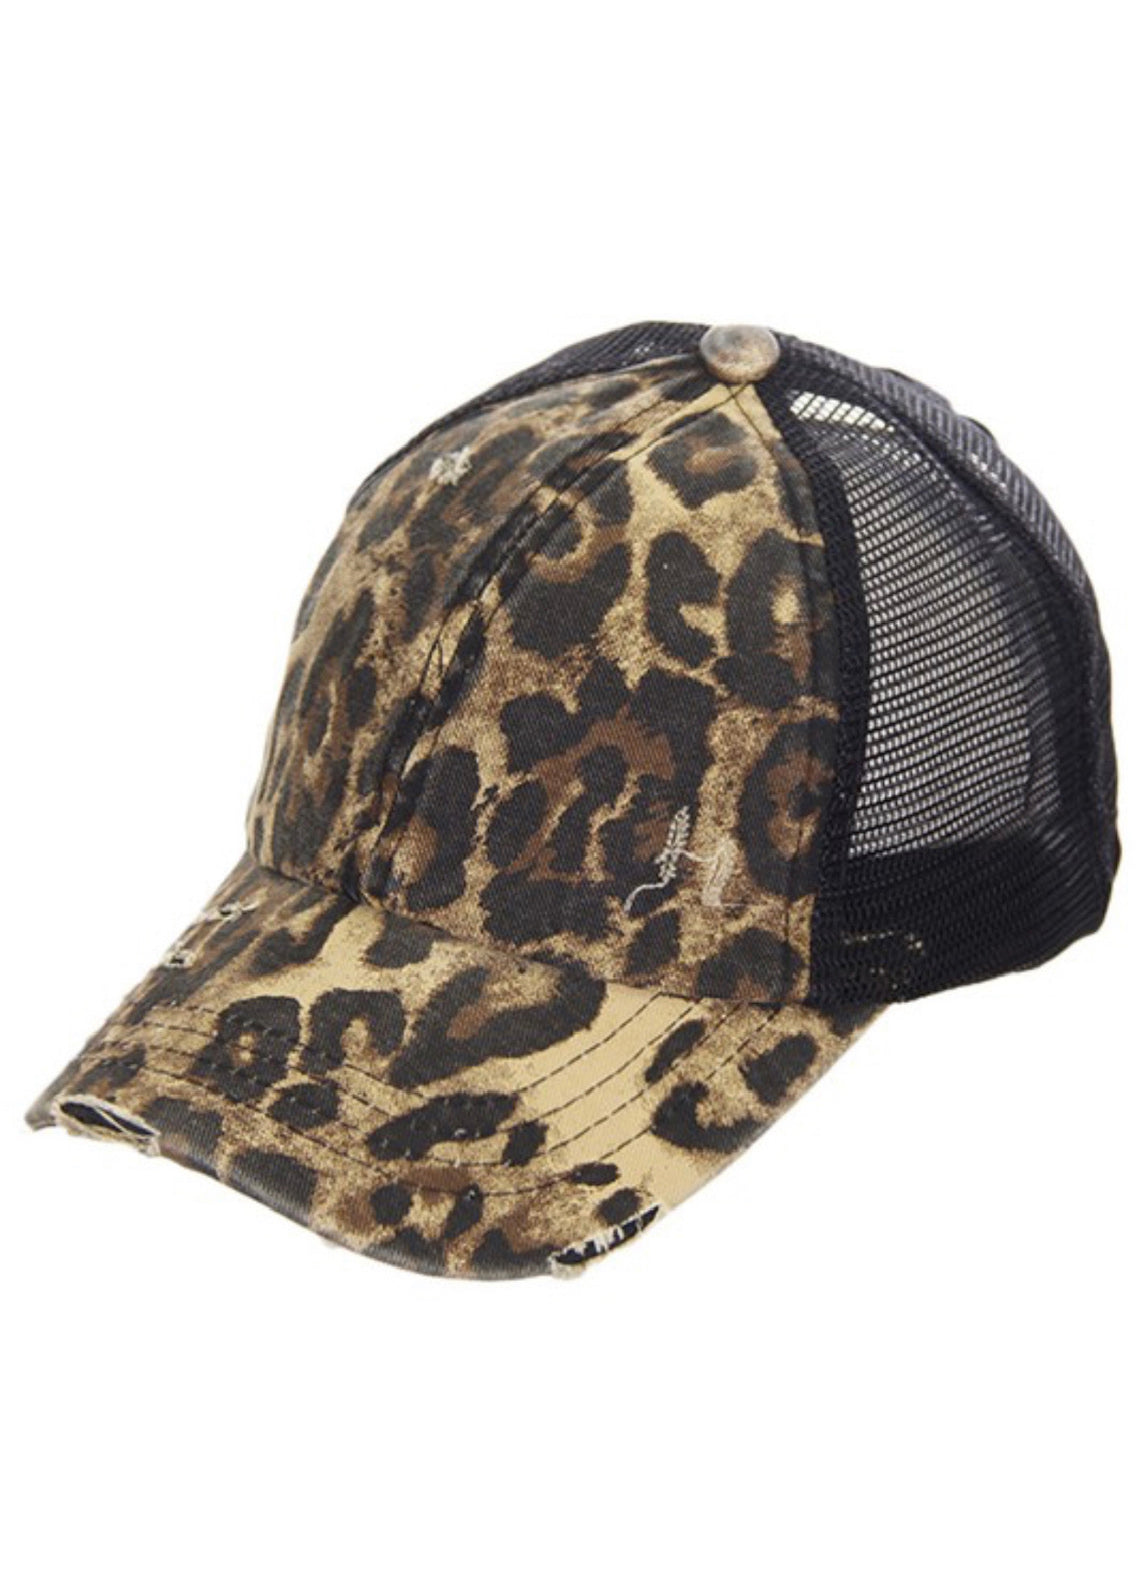 Leopard Ponytail hat with Distressing